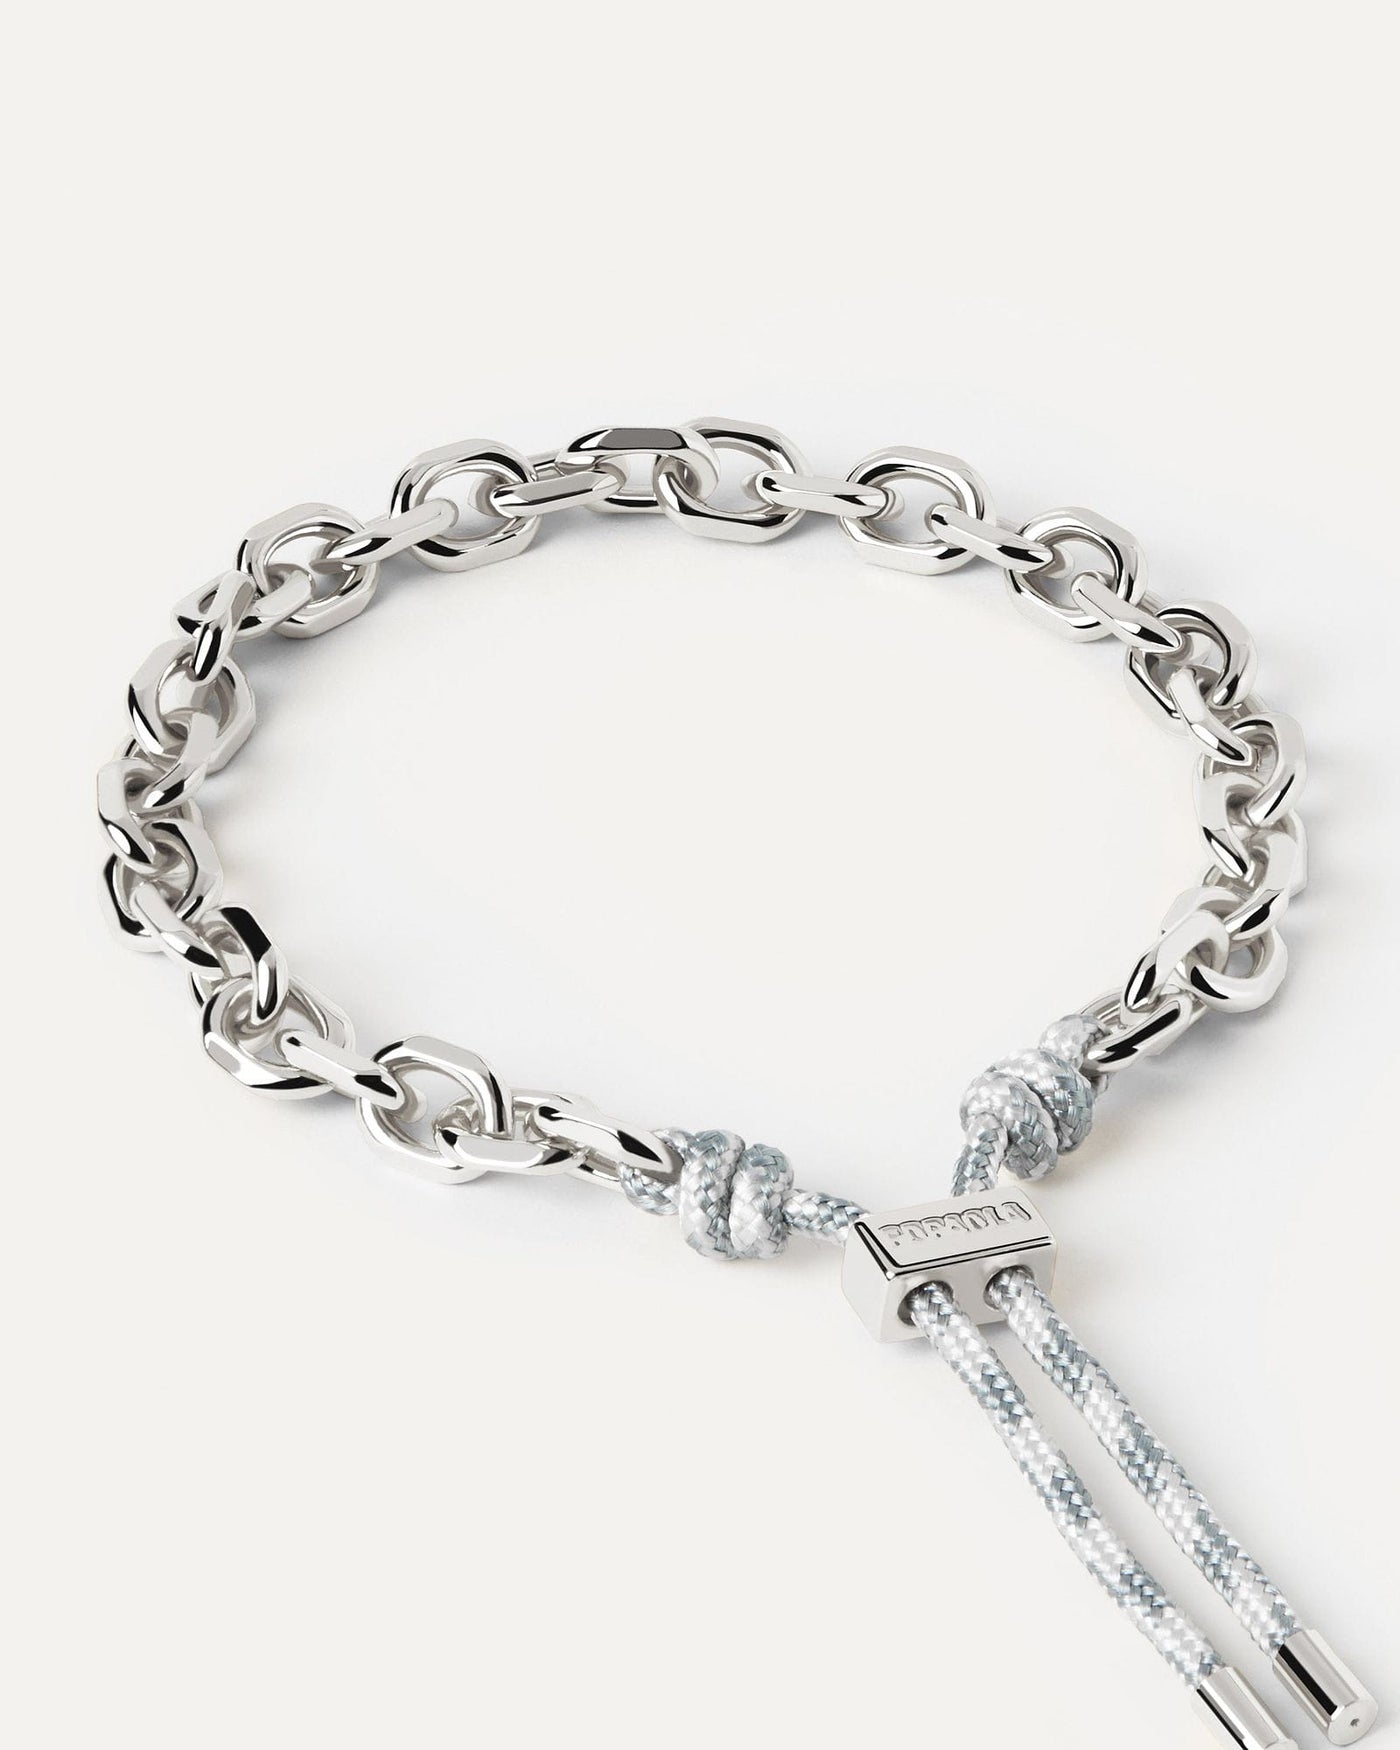 2024 Selection | Sky Essential Rope and Chain Silver Bracelet. Silver chain bracelet with a forest green rope adjustable sliding clasp. Get the latest arrival from PDPAOLA. Place your order safely and get this Best Seller. Free Shipping.